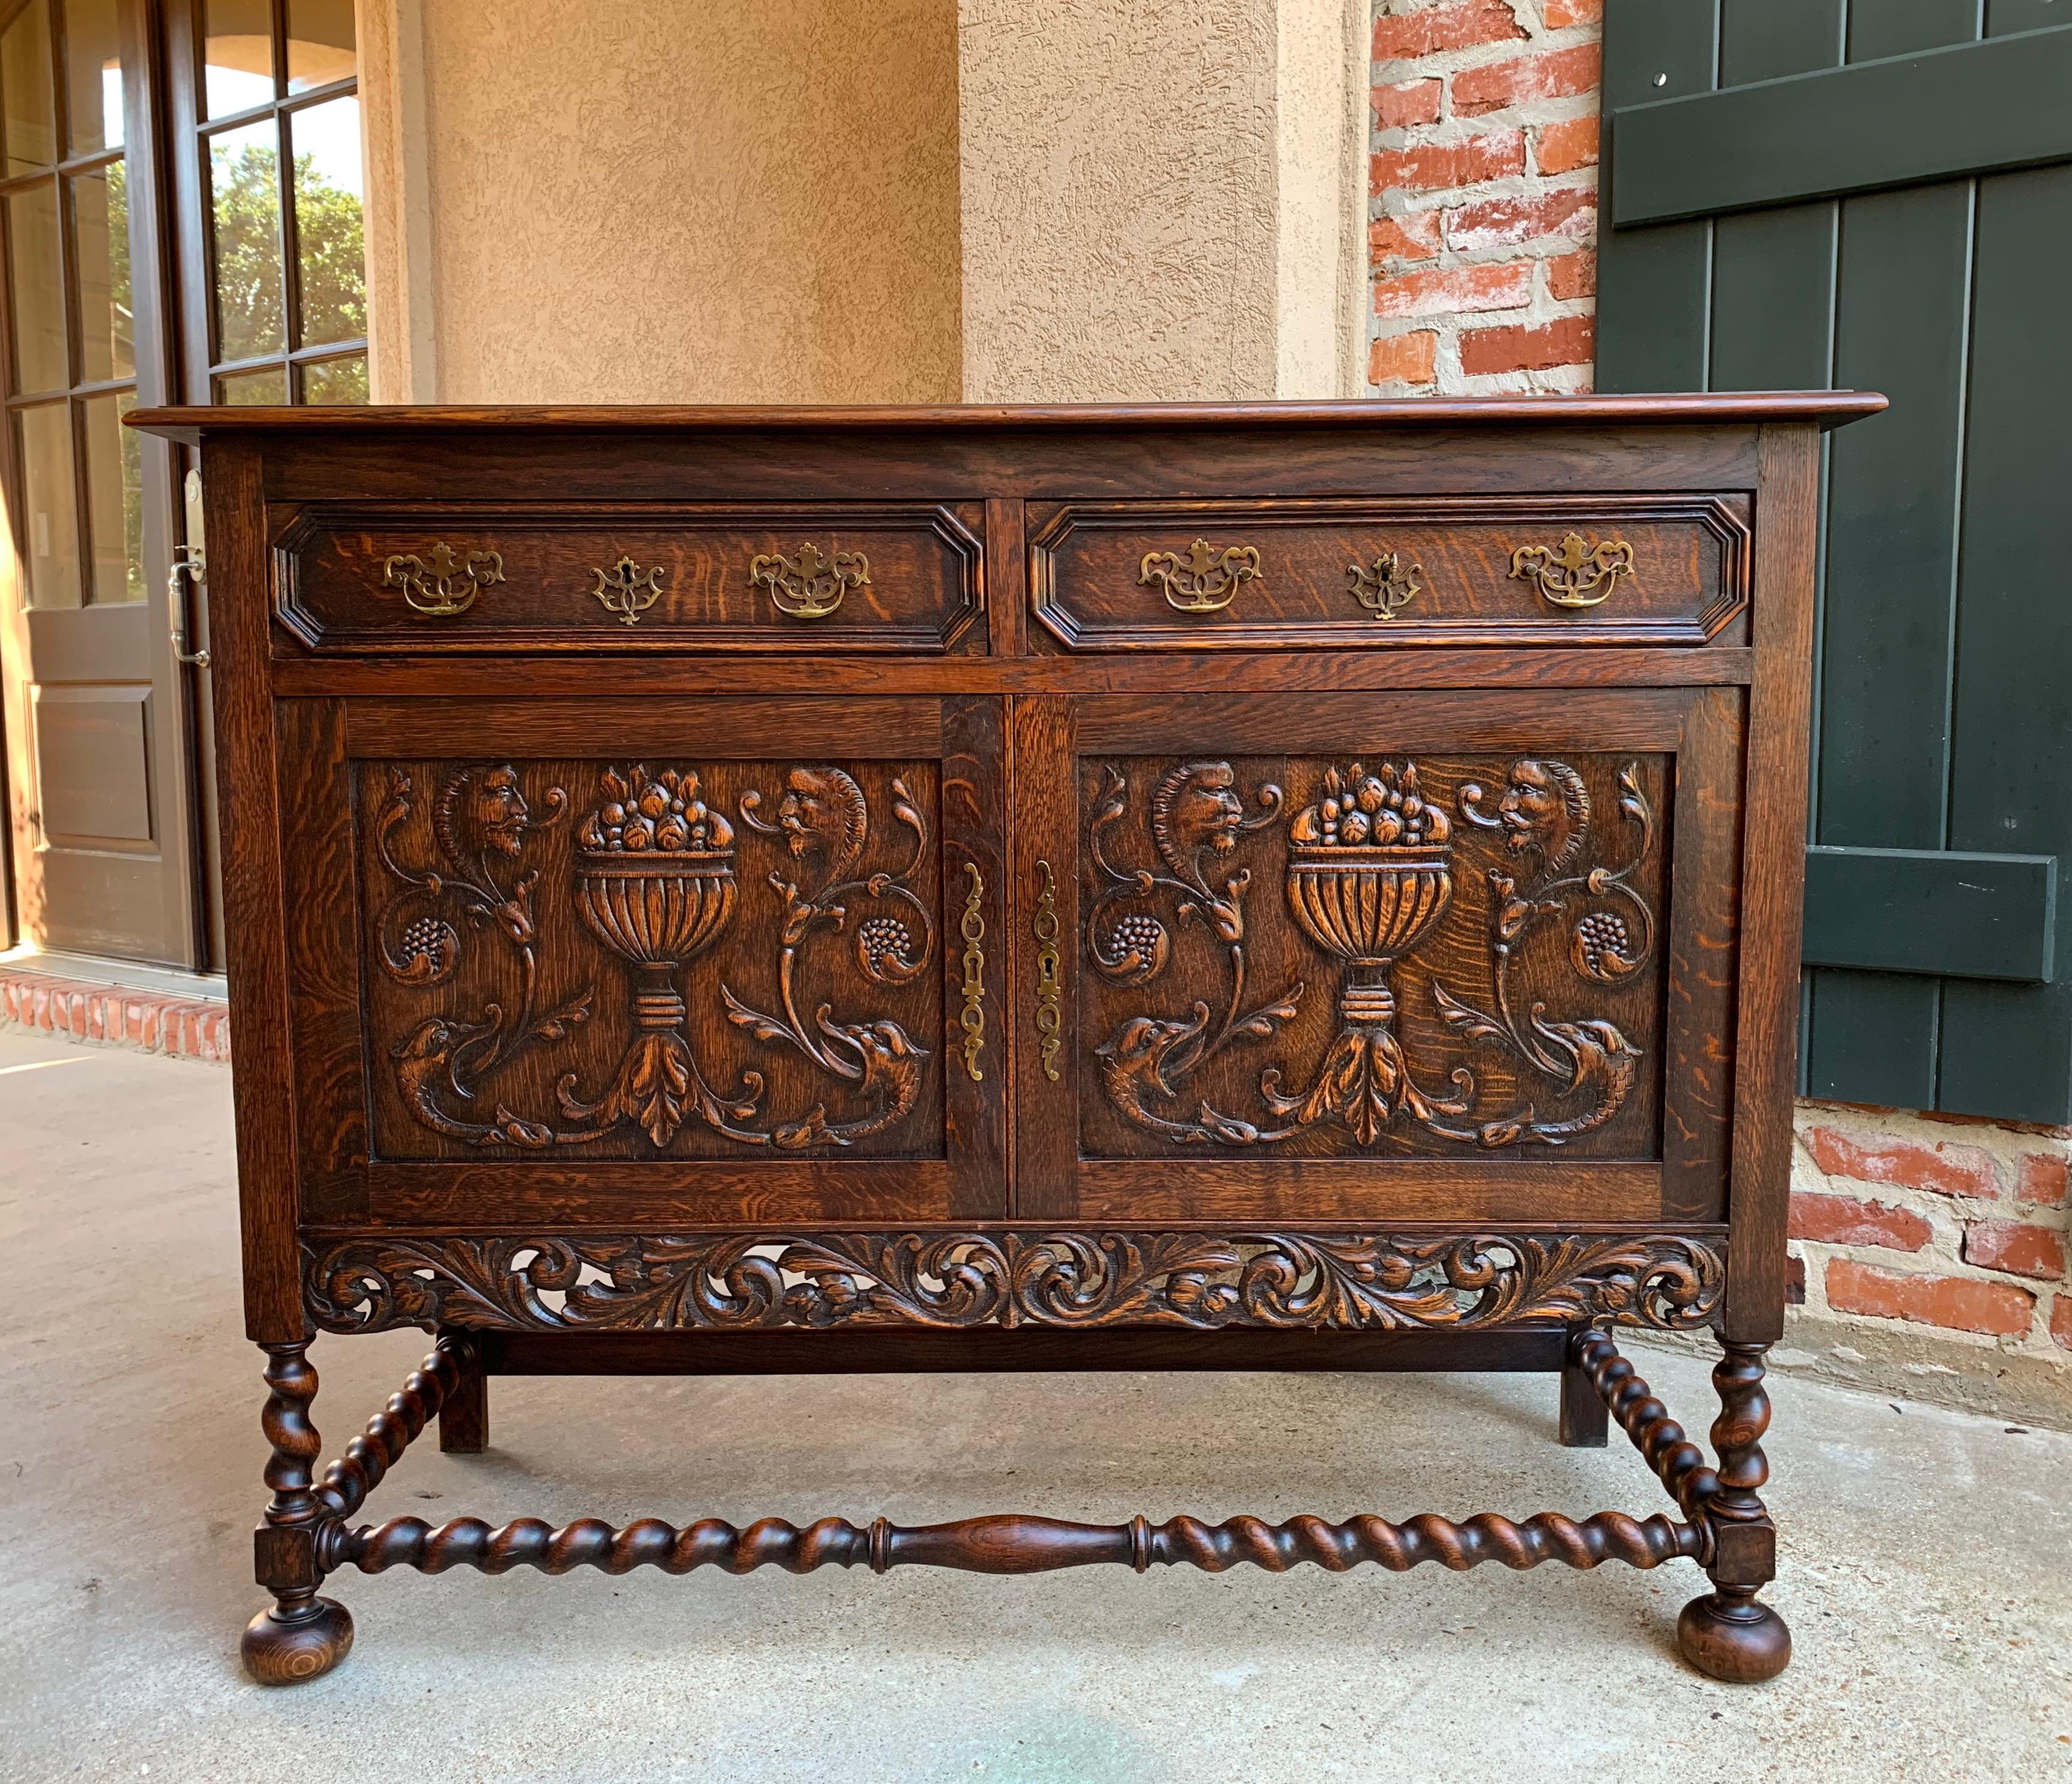 Direct from England, an outstanding antique English sideboard or cabinet, with beautiful features throughout!~
~Two large drawers have recessed octagon fronts and original brass hardware~
~Two doors feature beautiful center urns of fruits